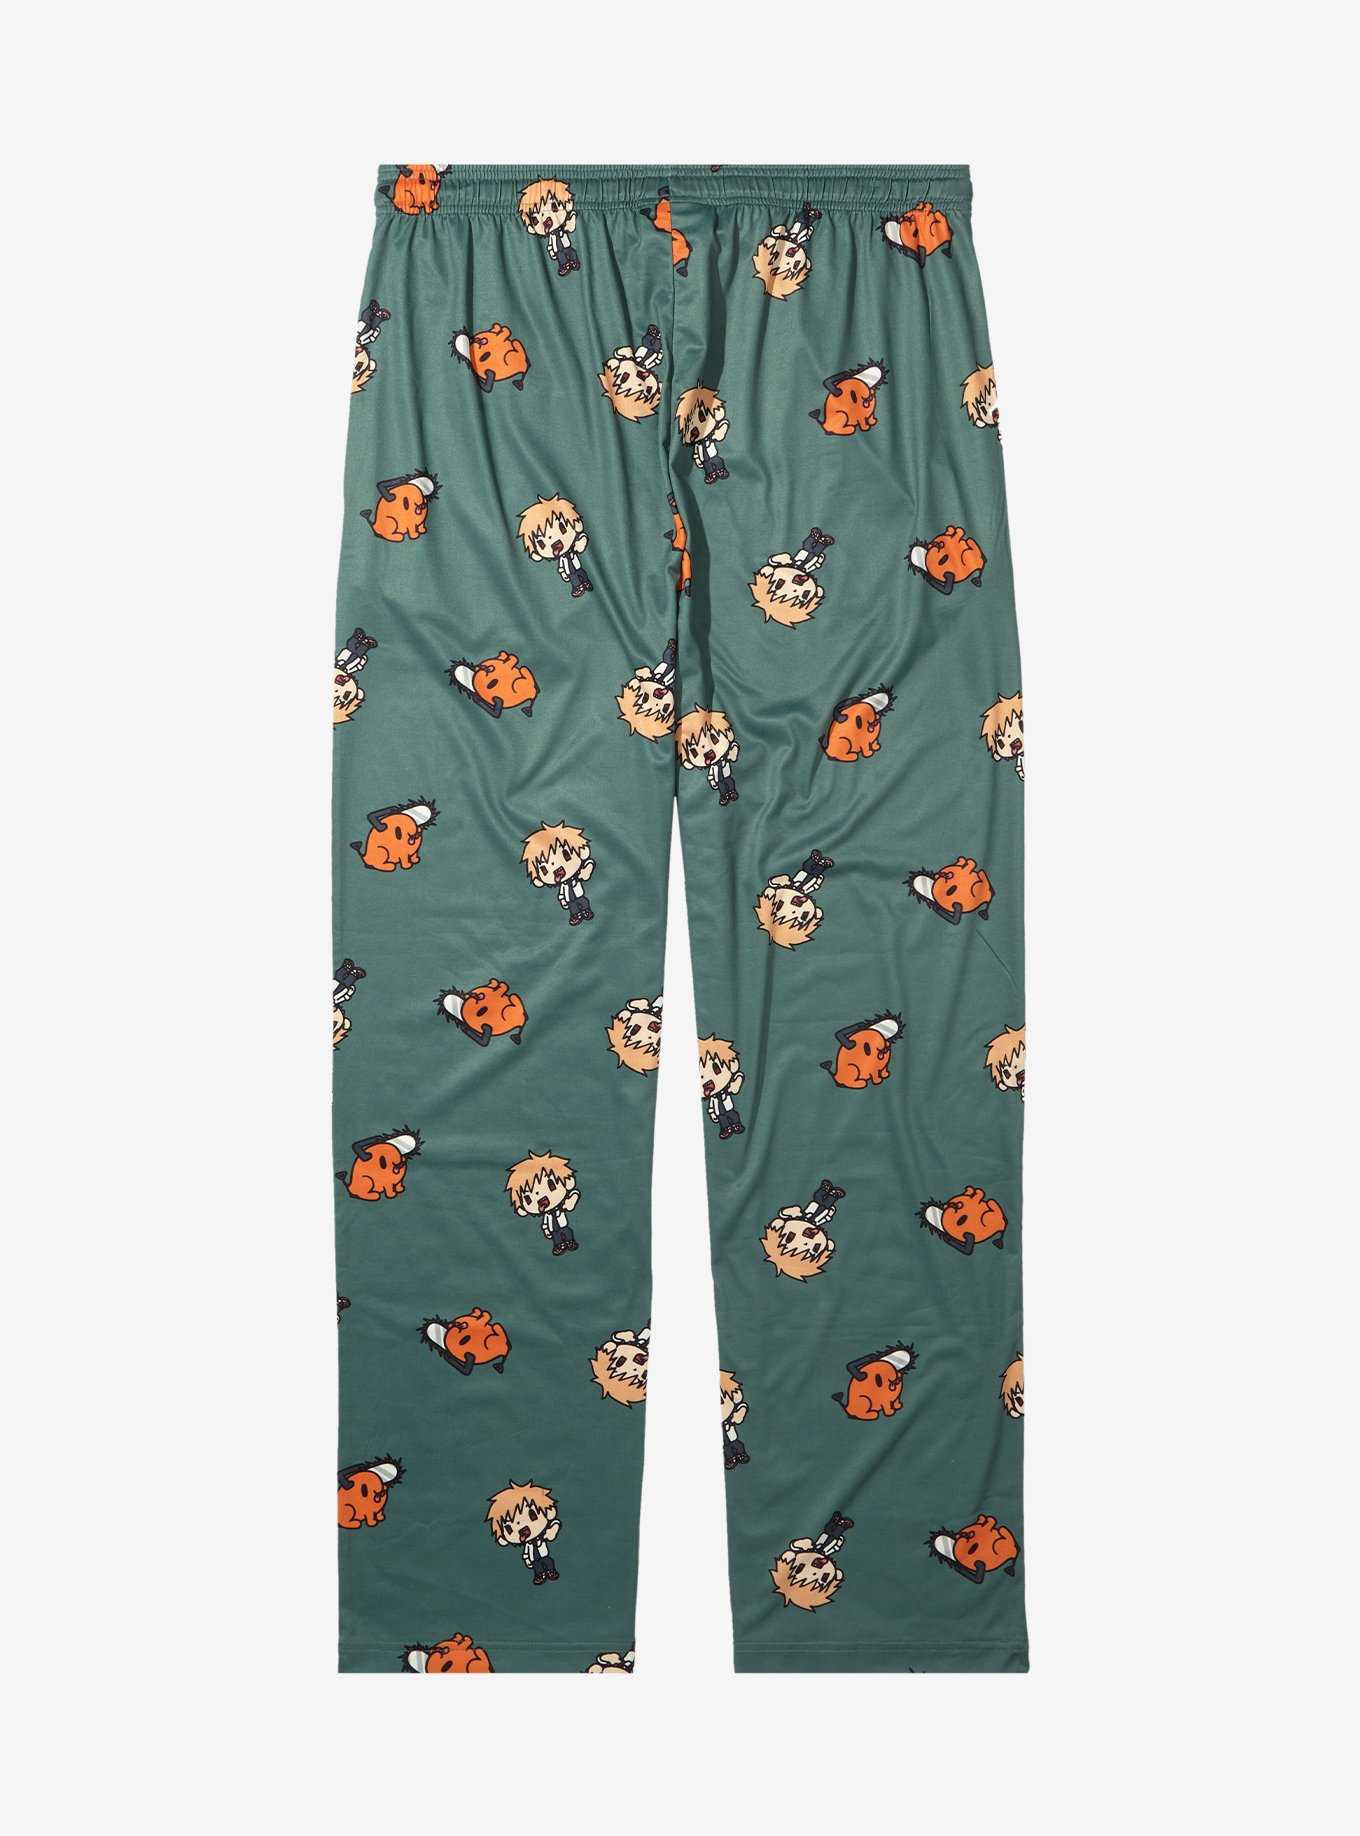 Chainsaw Man Chibi Allover Print Sleep Pants - BoxLunch Exclusive , , hi-res